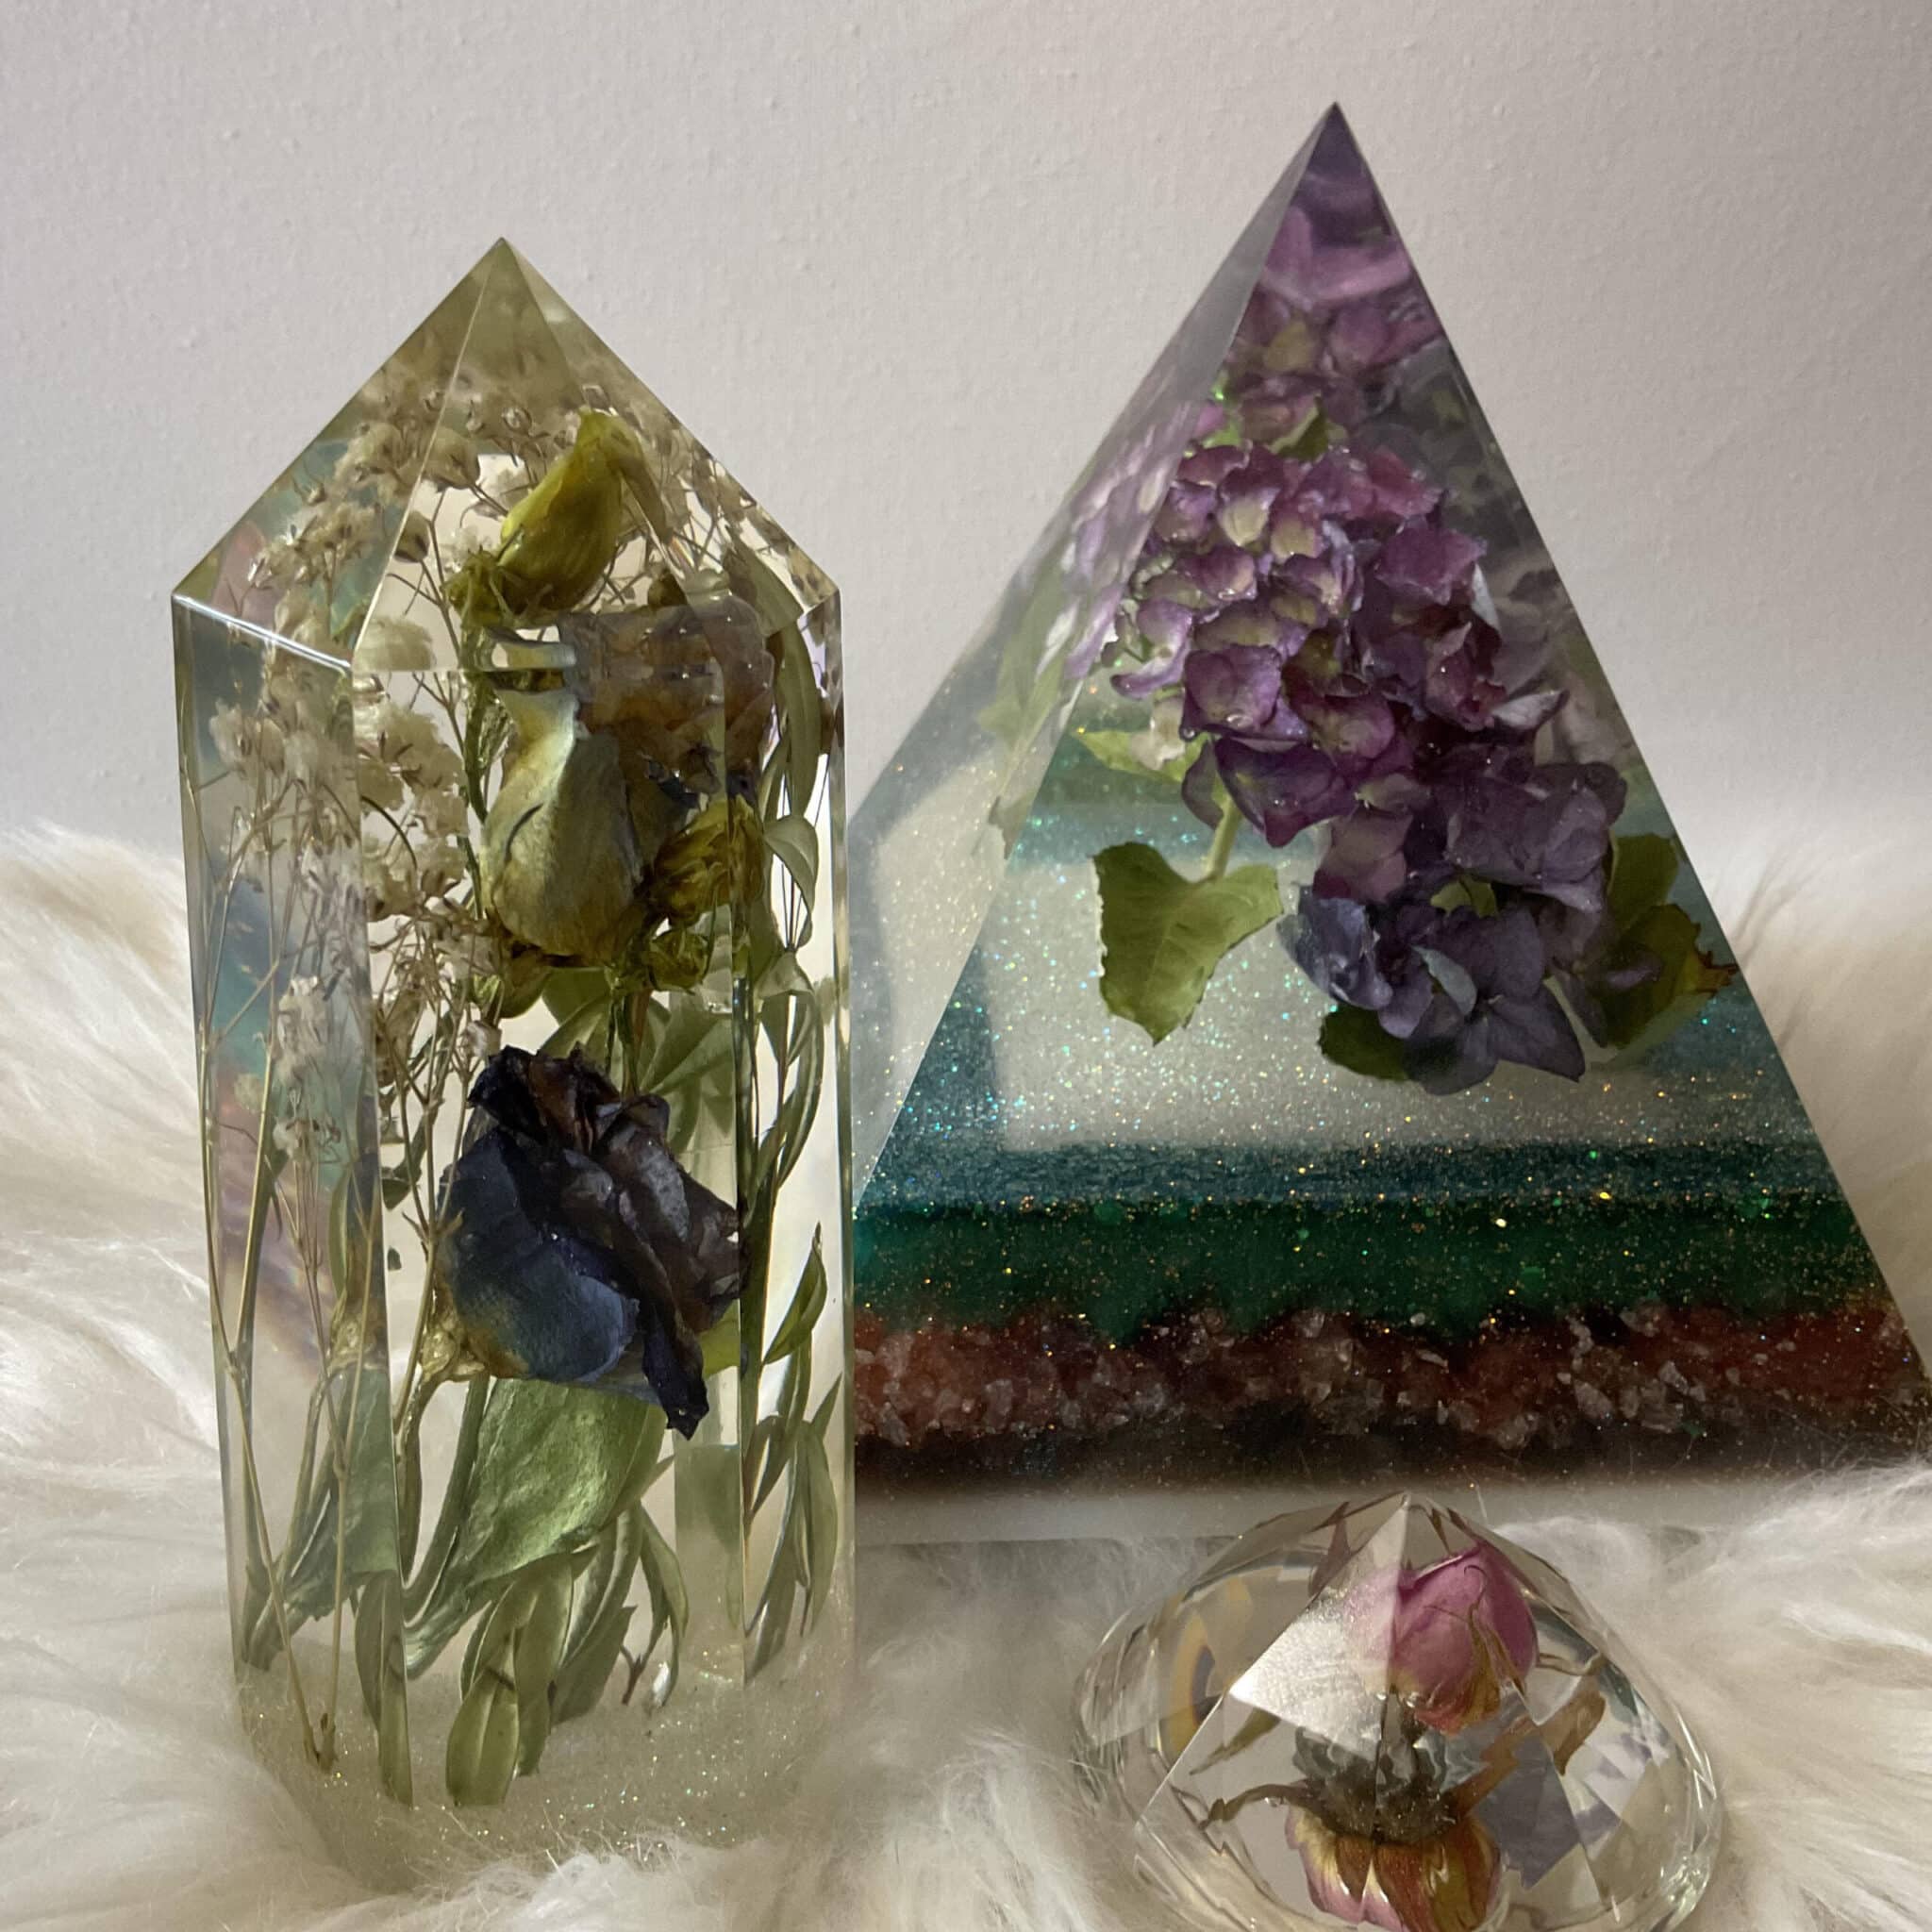 How to casting dried flowers in epoxy resin